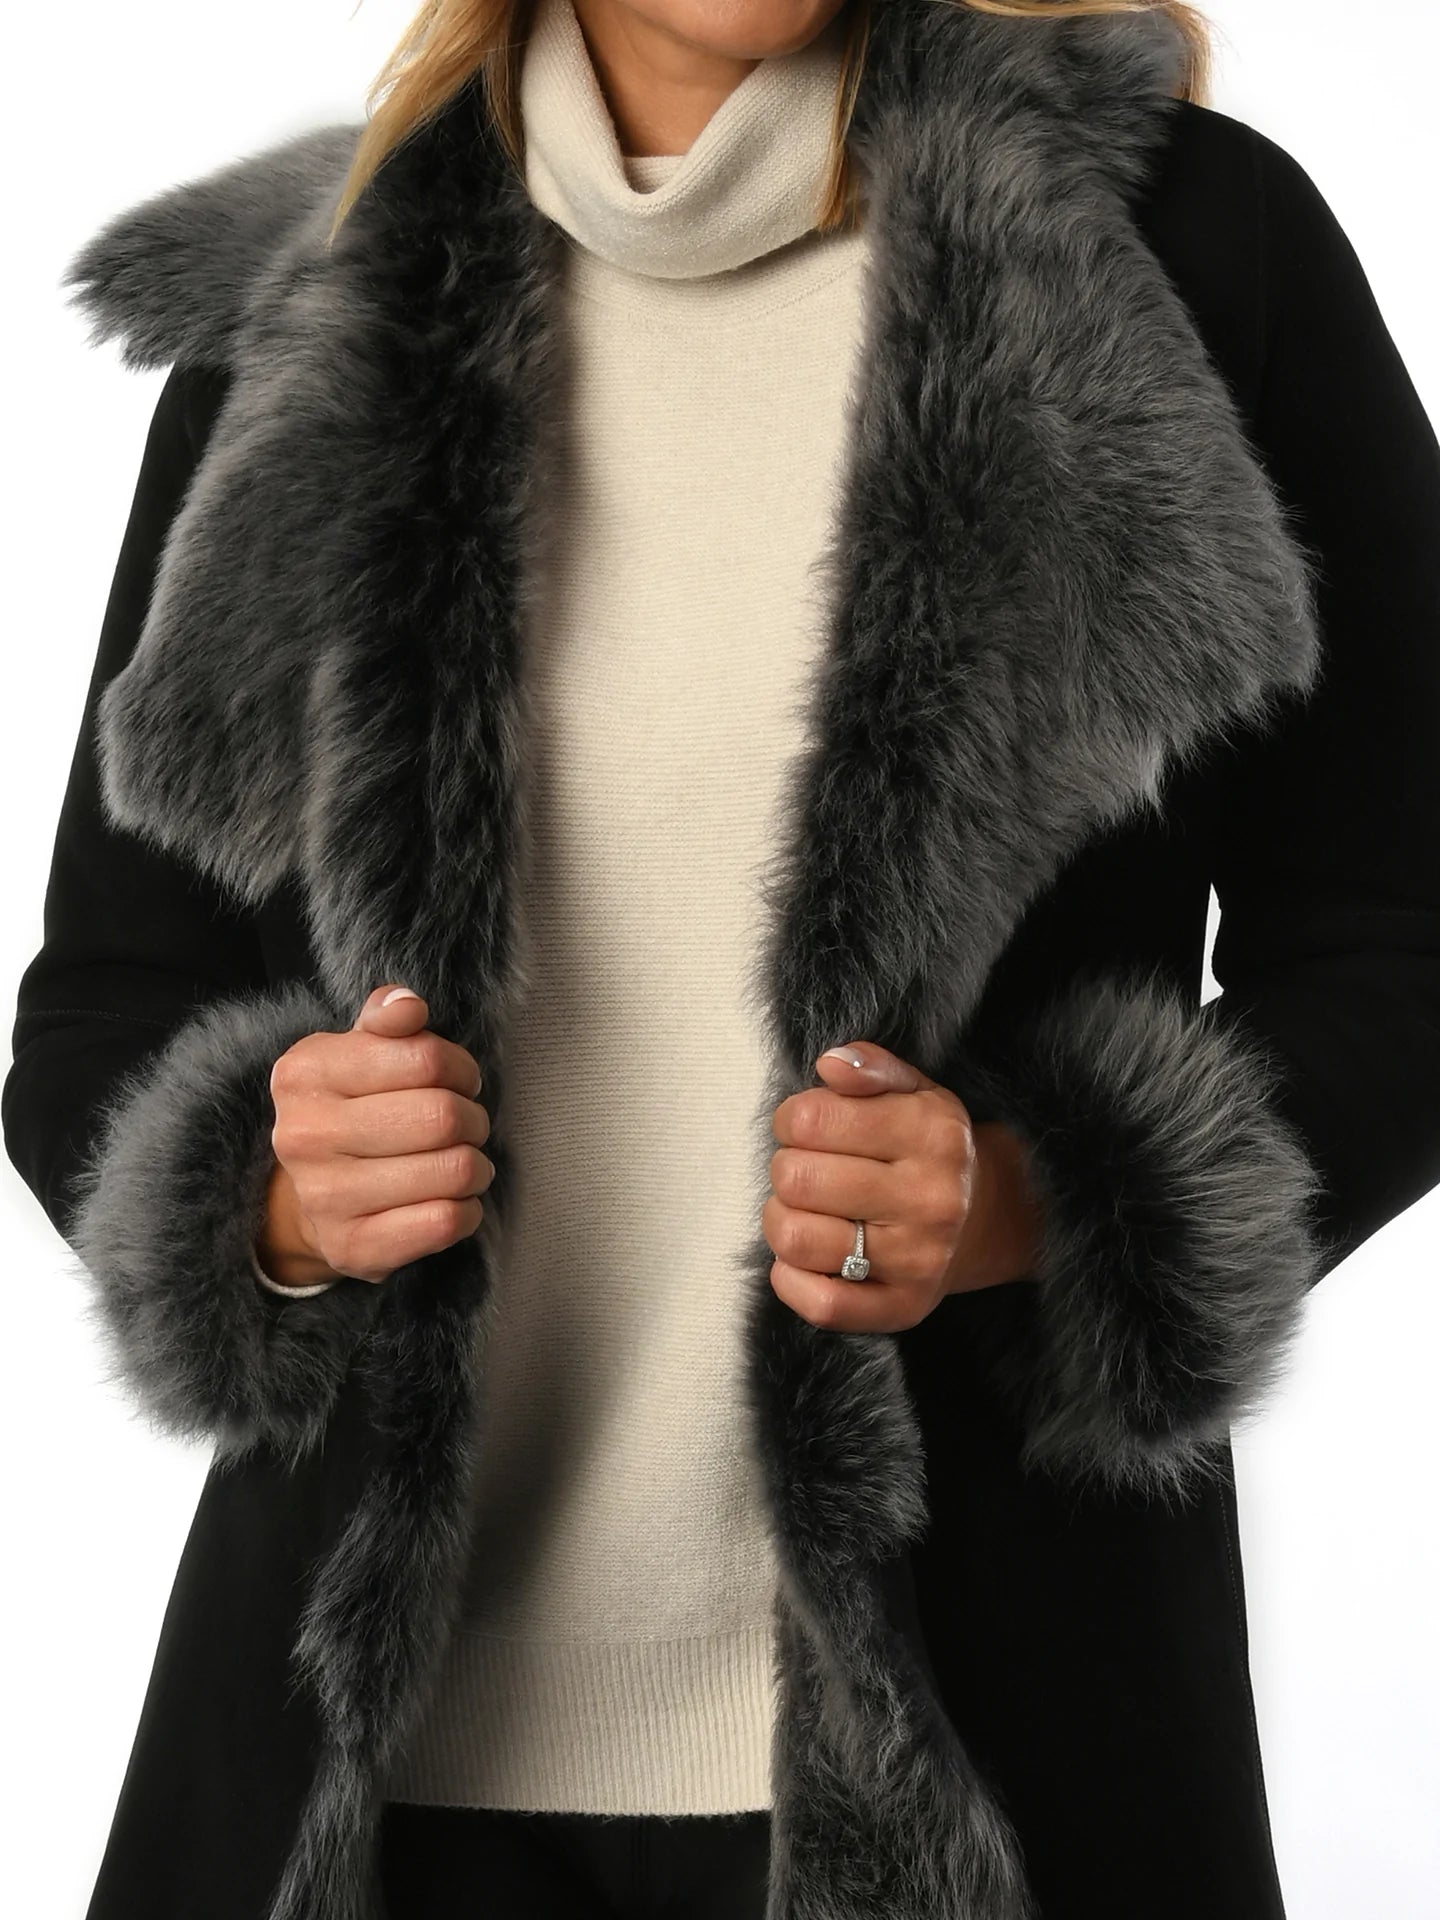 Black with Grey Ladies Women's Toscana Sheepskin Suede Coat for sale - Woodcock and Cavendish